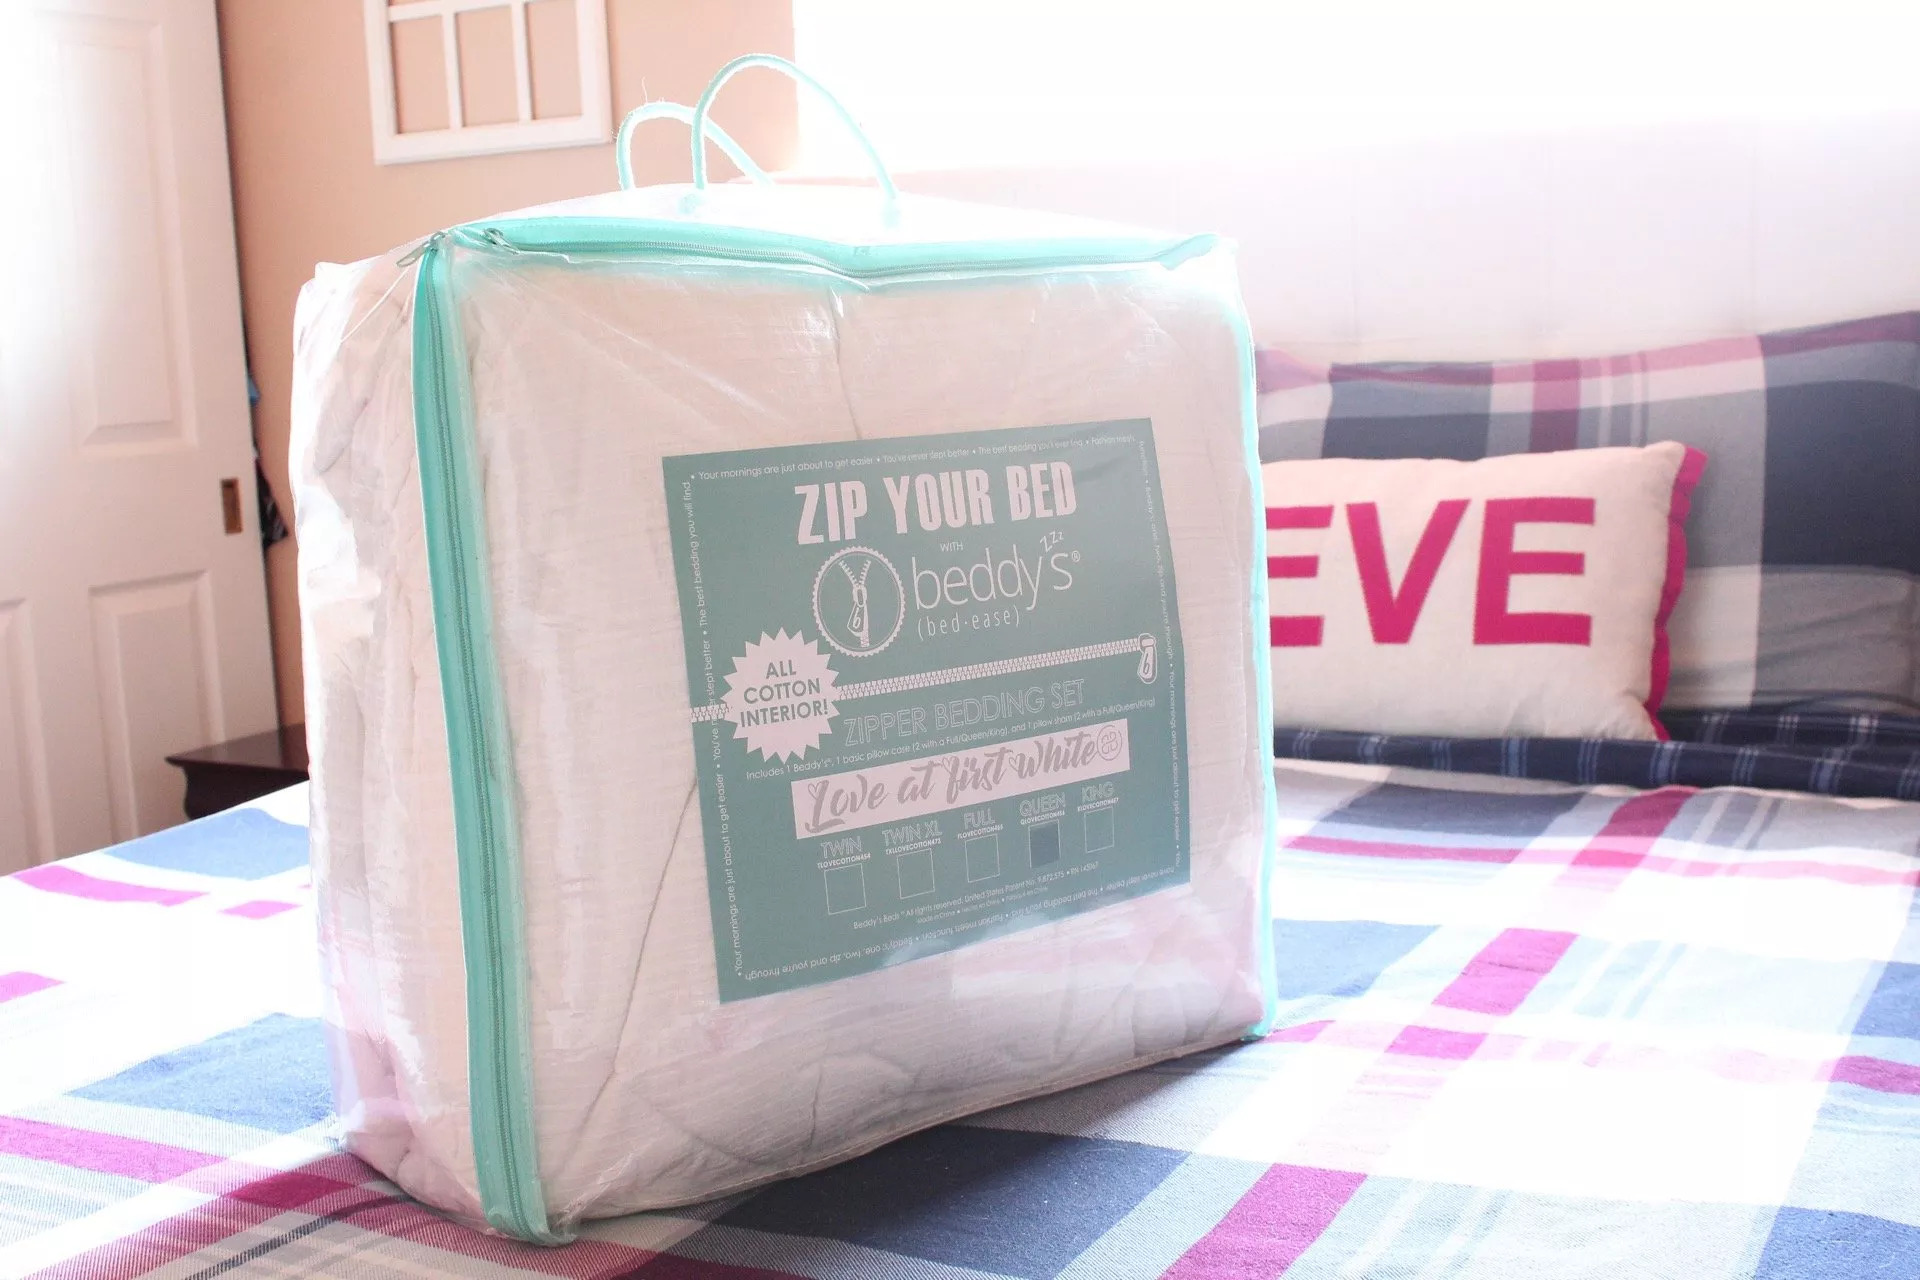 Everything You Need To Know About Zippered Bedding #slayathomeother #bedding #beddys - SLAYathomemother.com